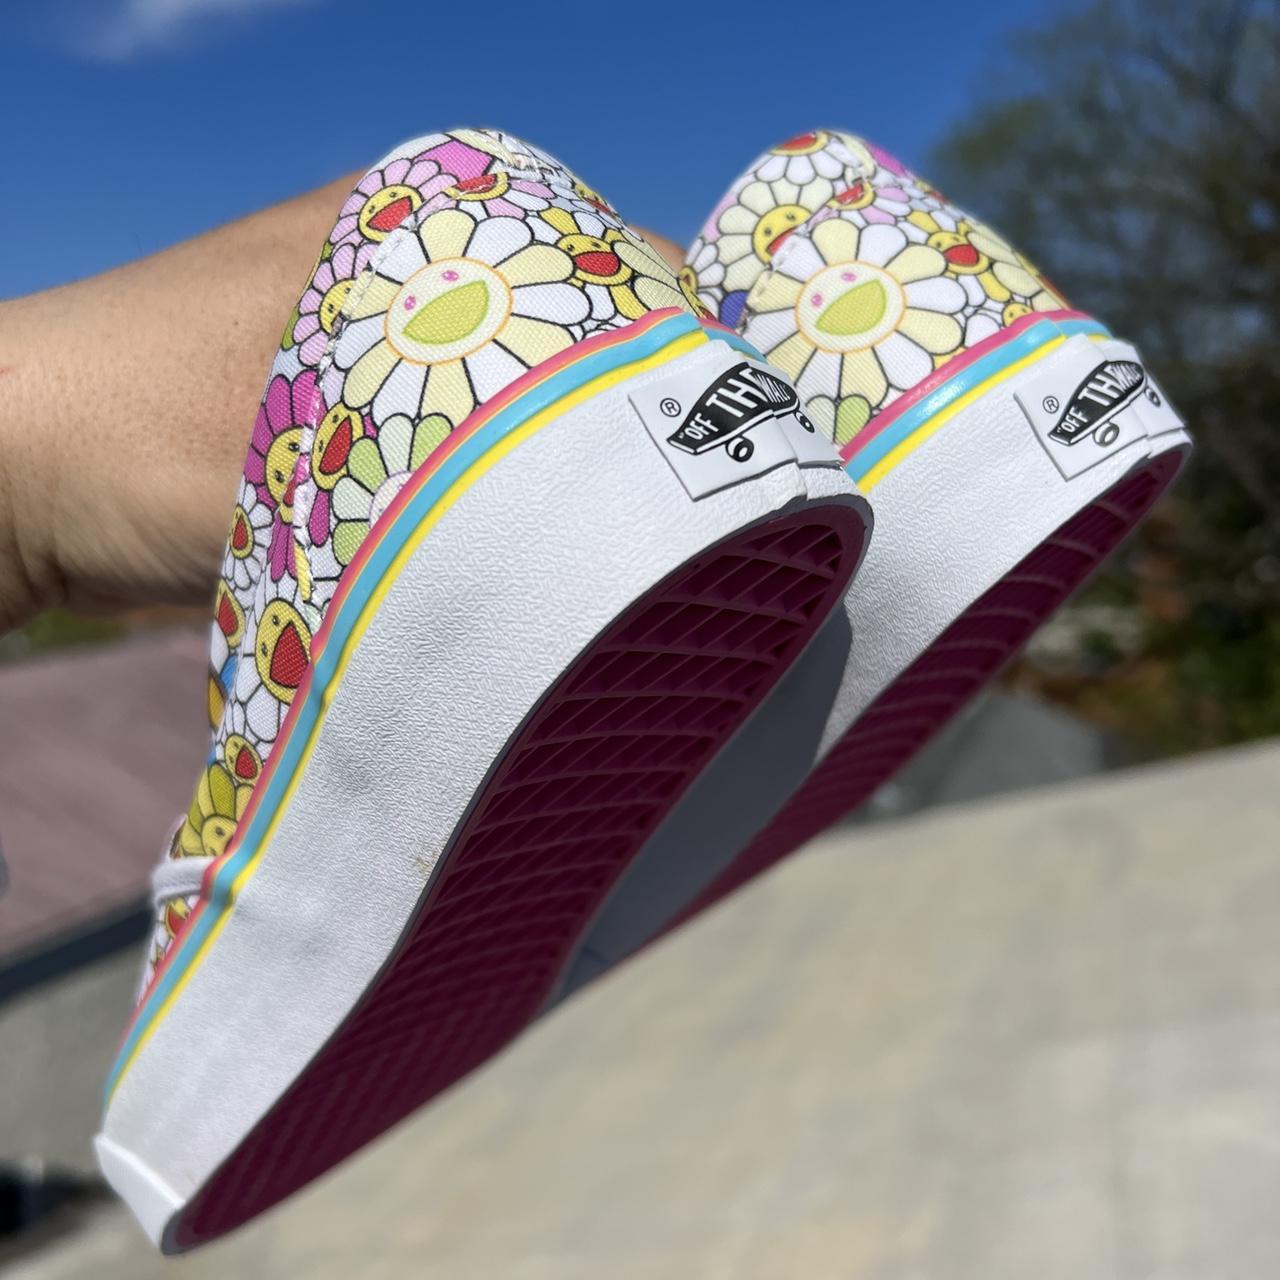 Vault by Vans x Takashi Murakami Kids Collection - mini:licious by